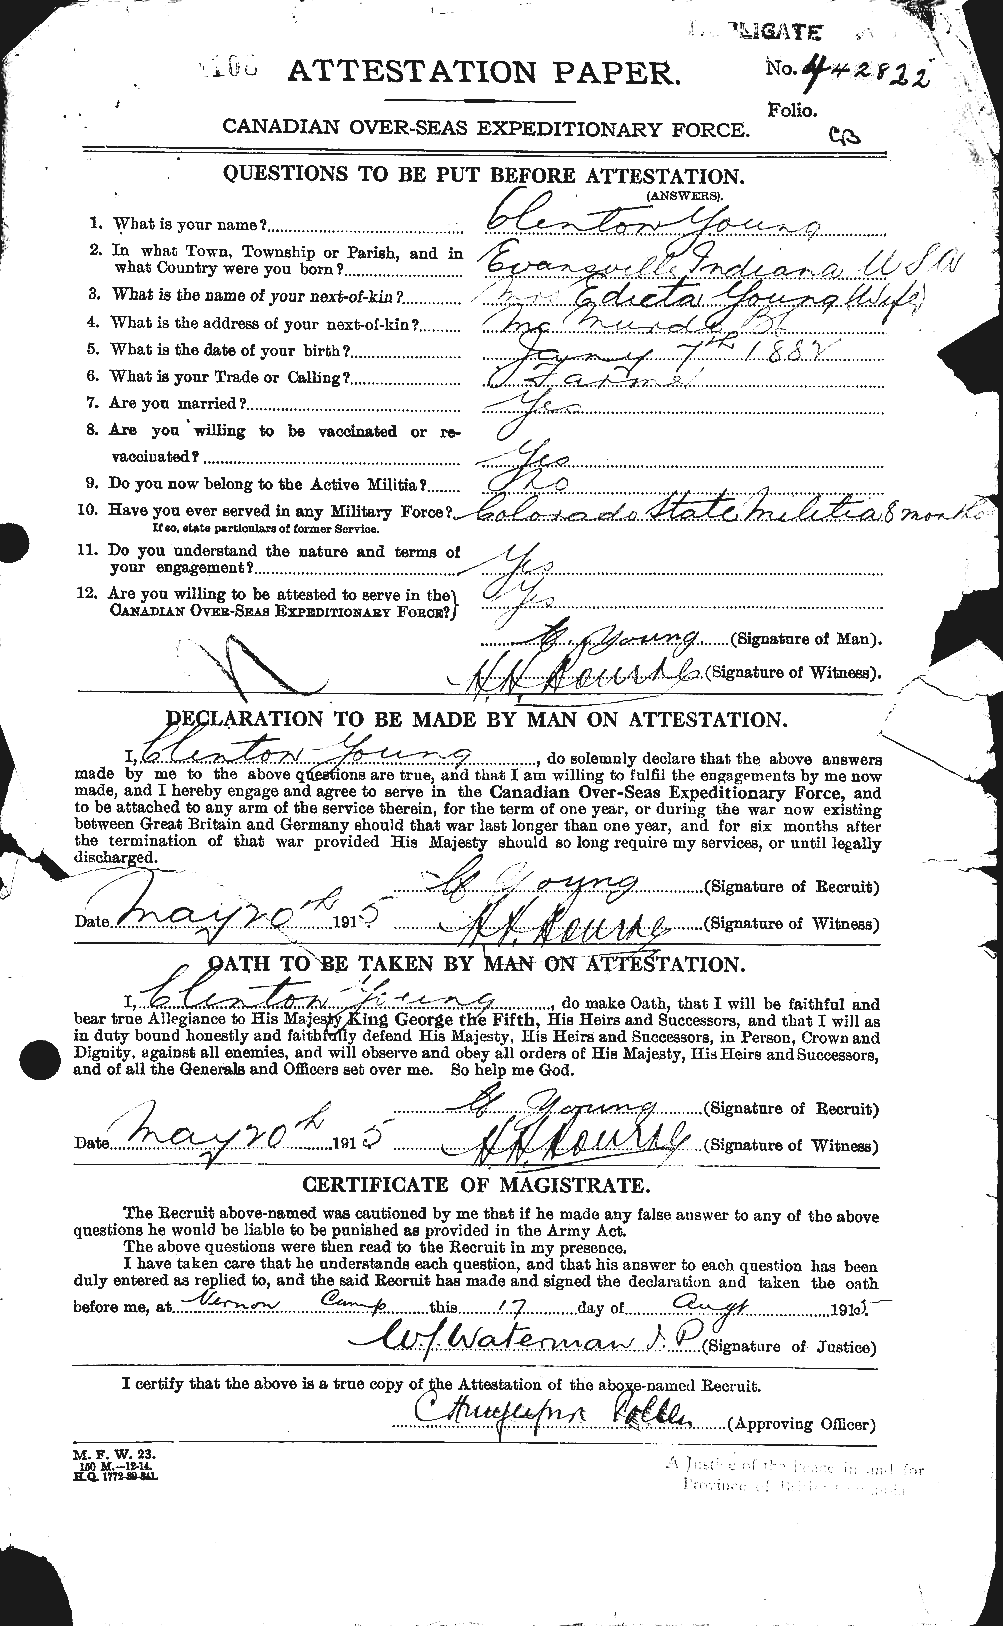 Personnel Records of the First World War - CEF 690169a